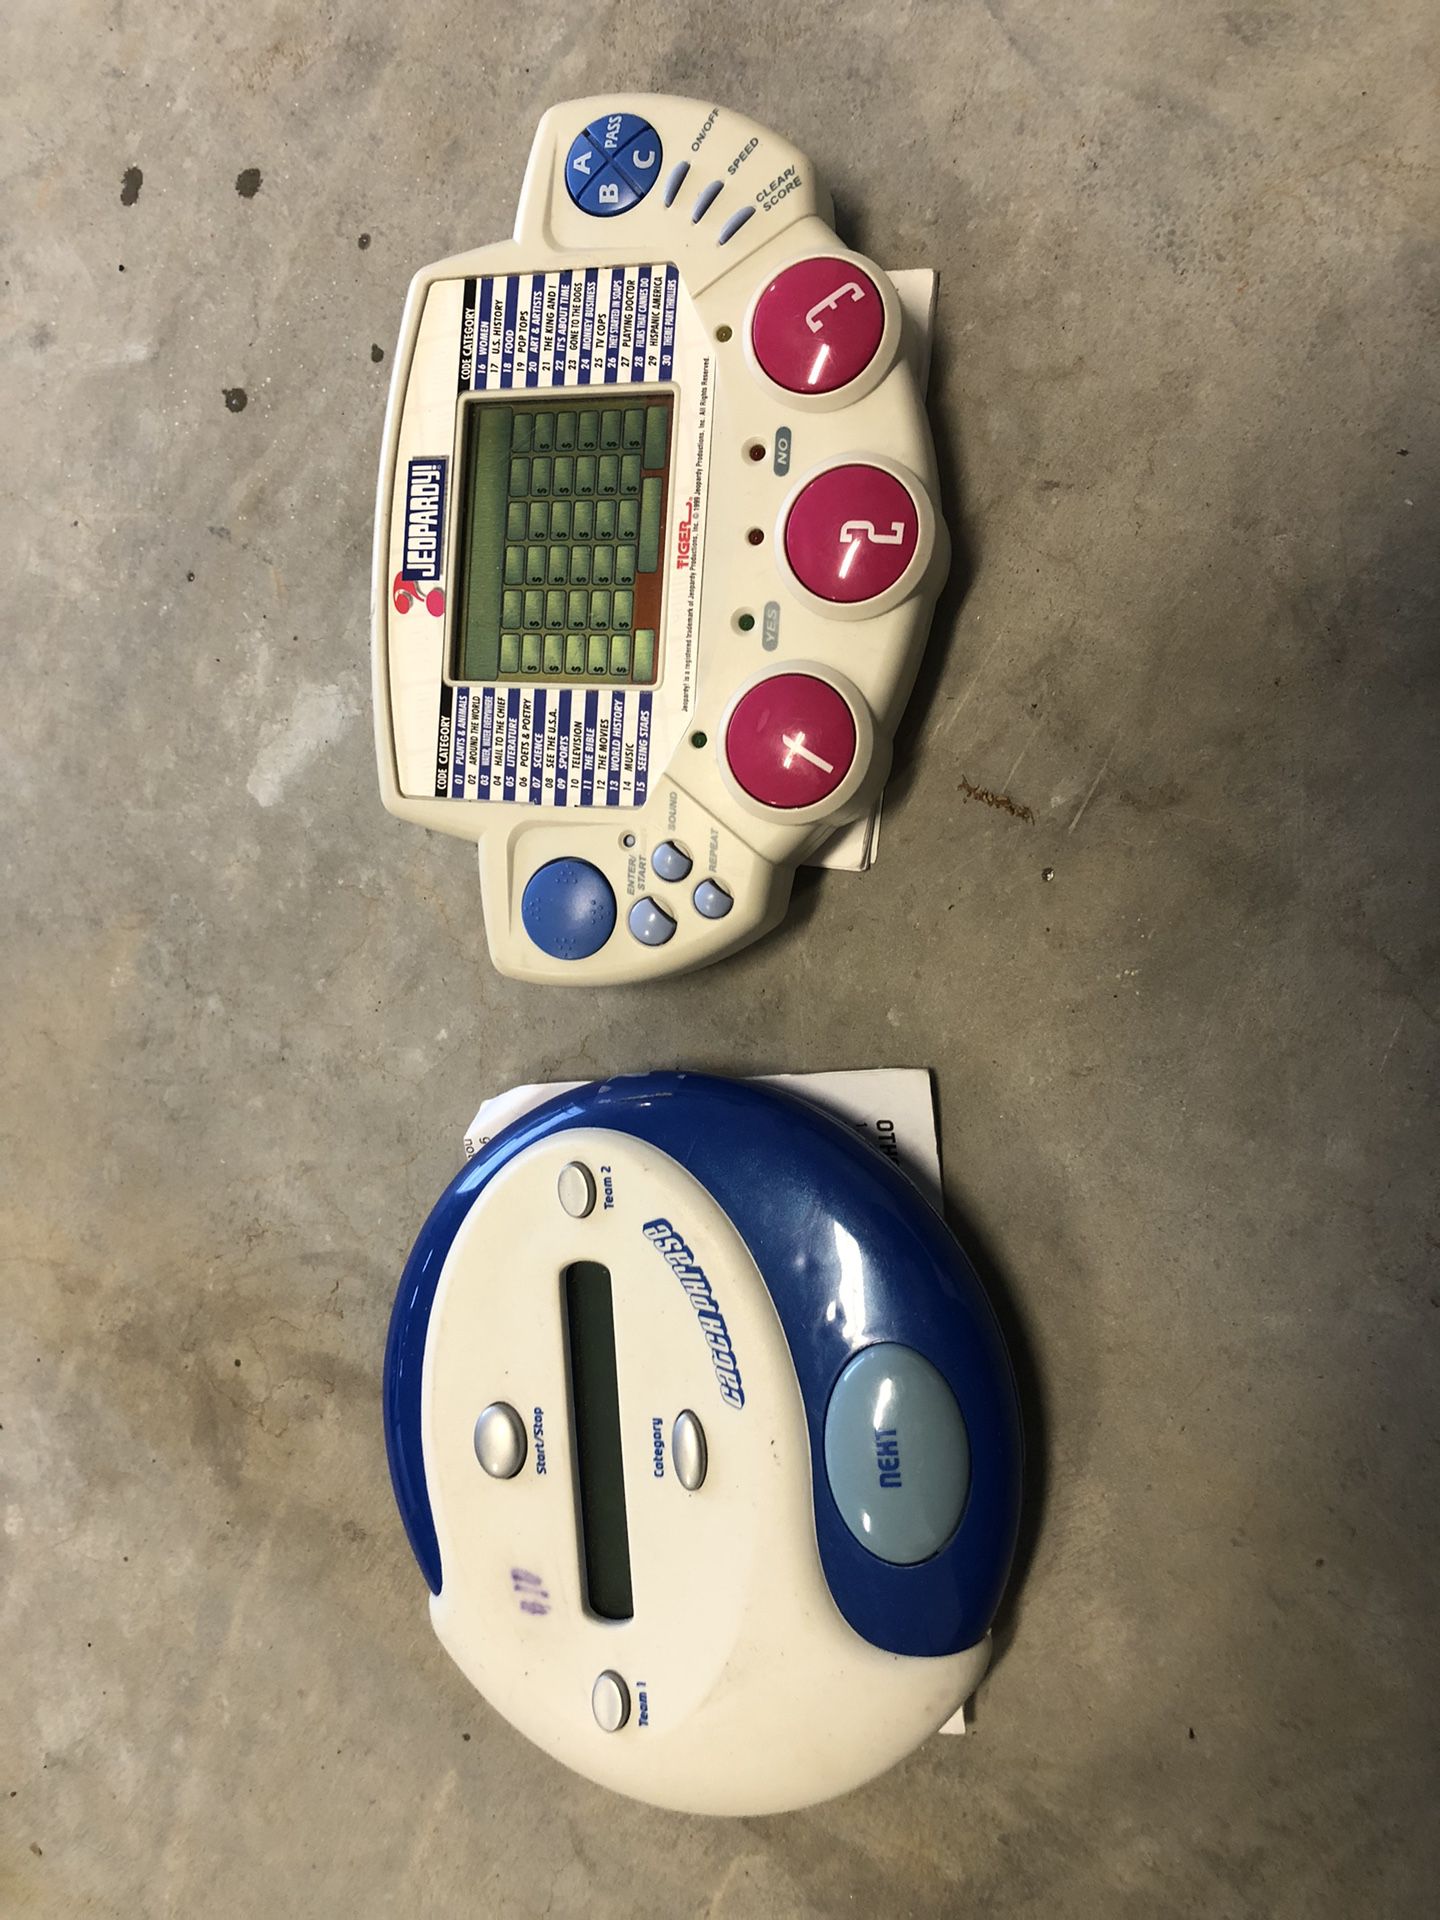 Catch Phrase & Jeopardy Handheld Games